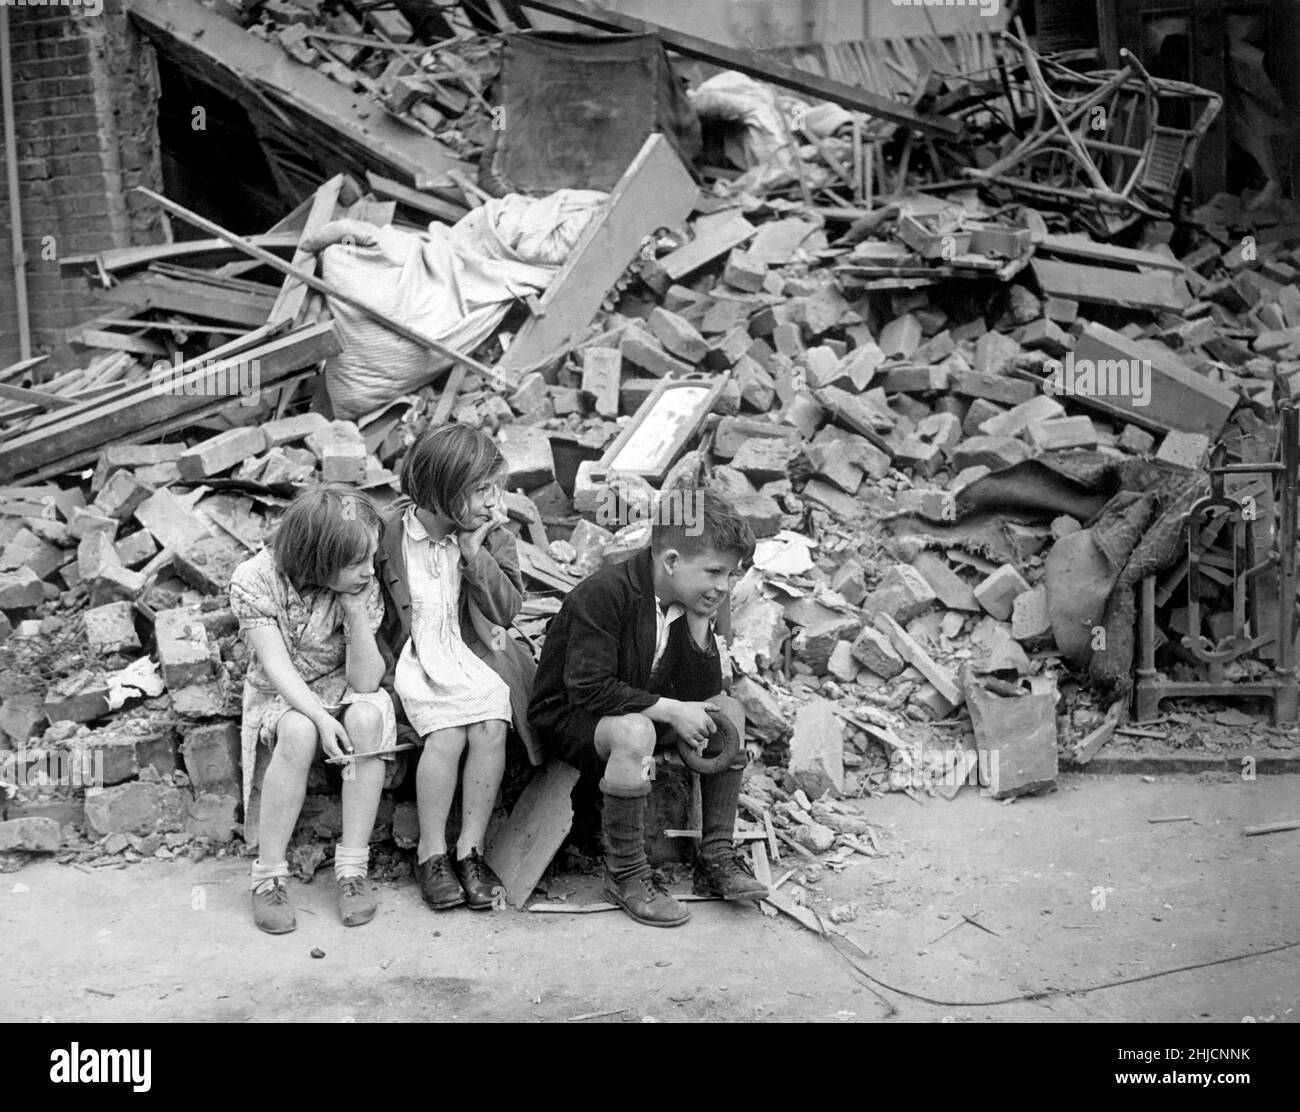 Children in an eastern suburb of London whose home was destroyed in The Blitz, September 1940. The Blitz was a German bombing campaign against the United Kingdom in 1940 and 1941, during the Second World War. The term comes from Blitzkrieg, meaning 'lightning war' in German. Stock Photo